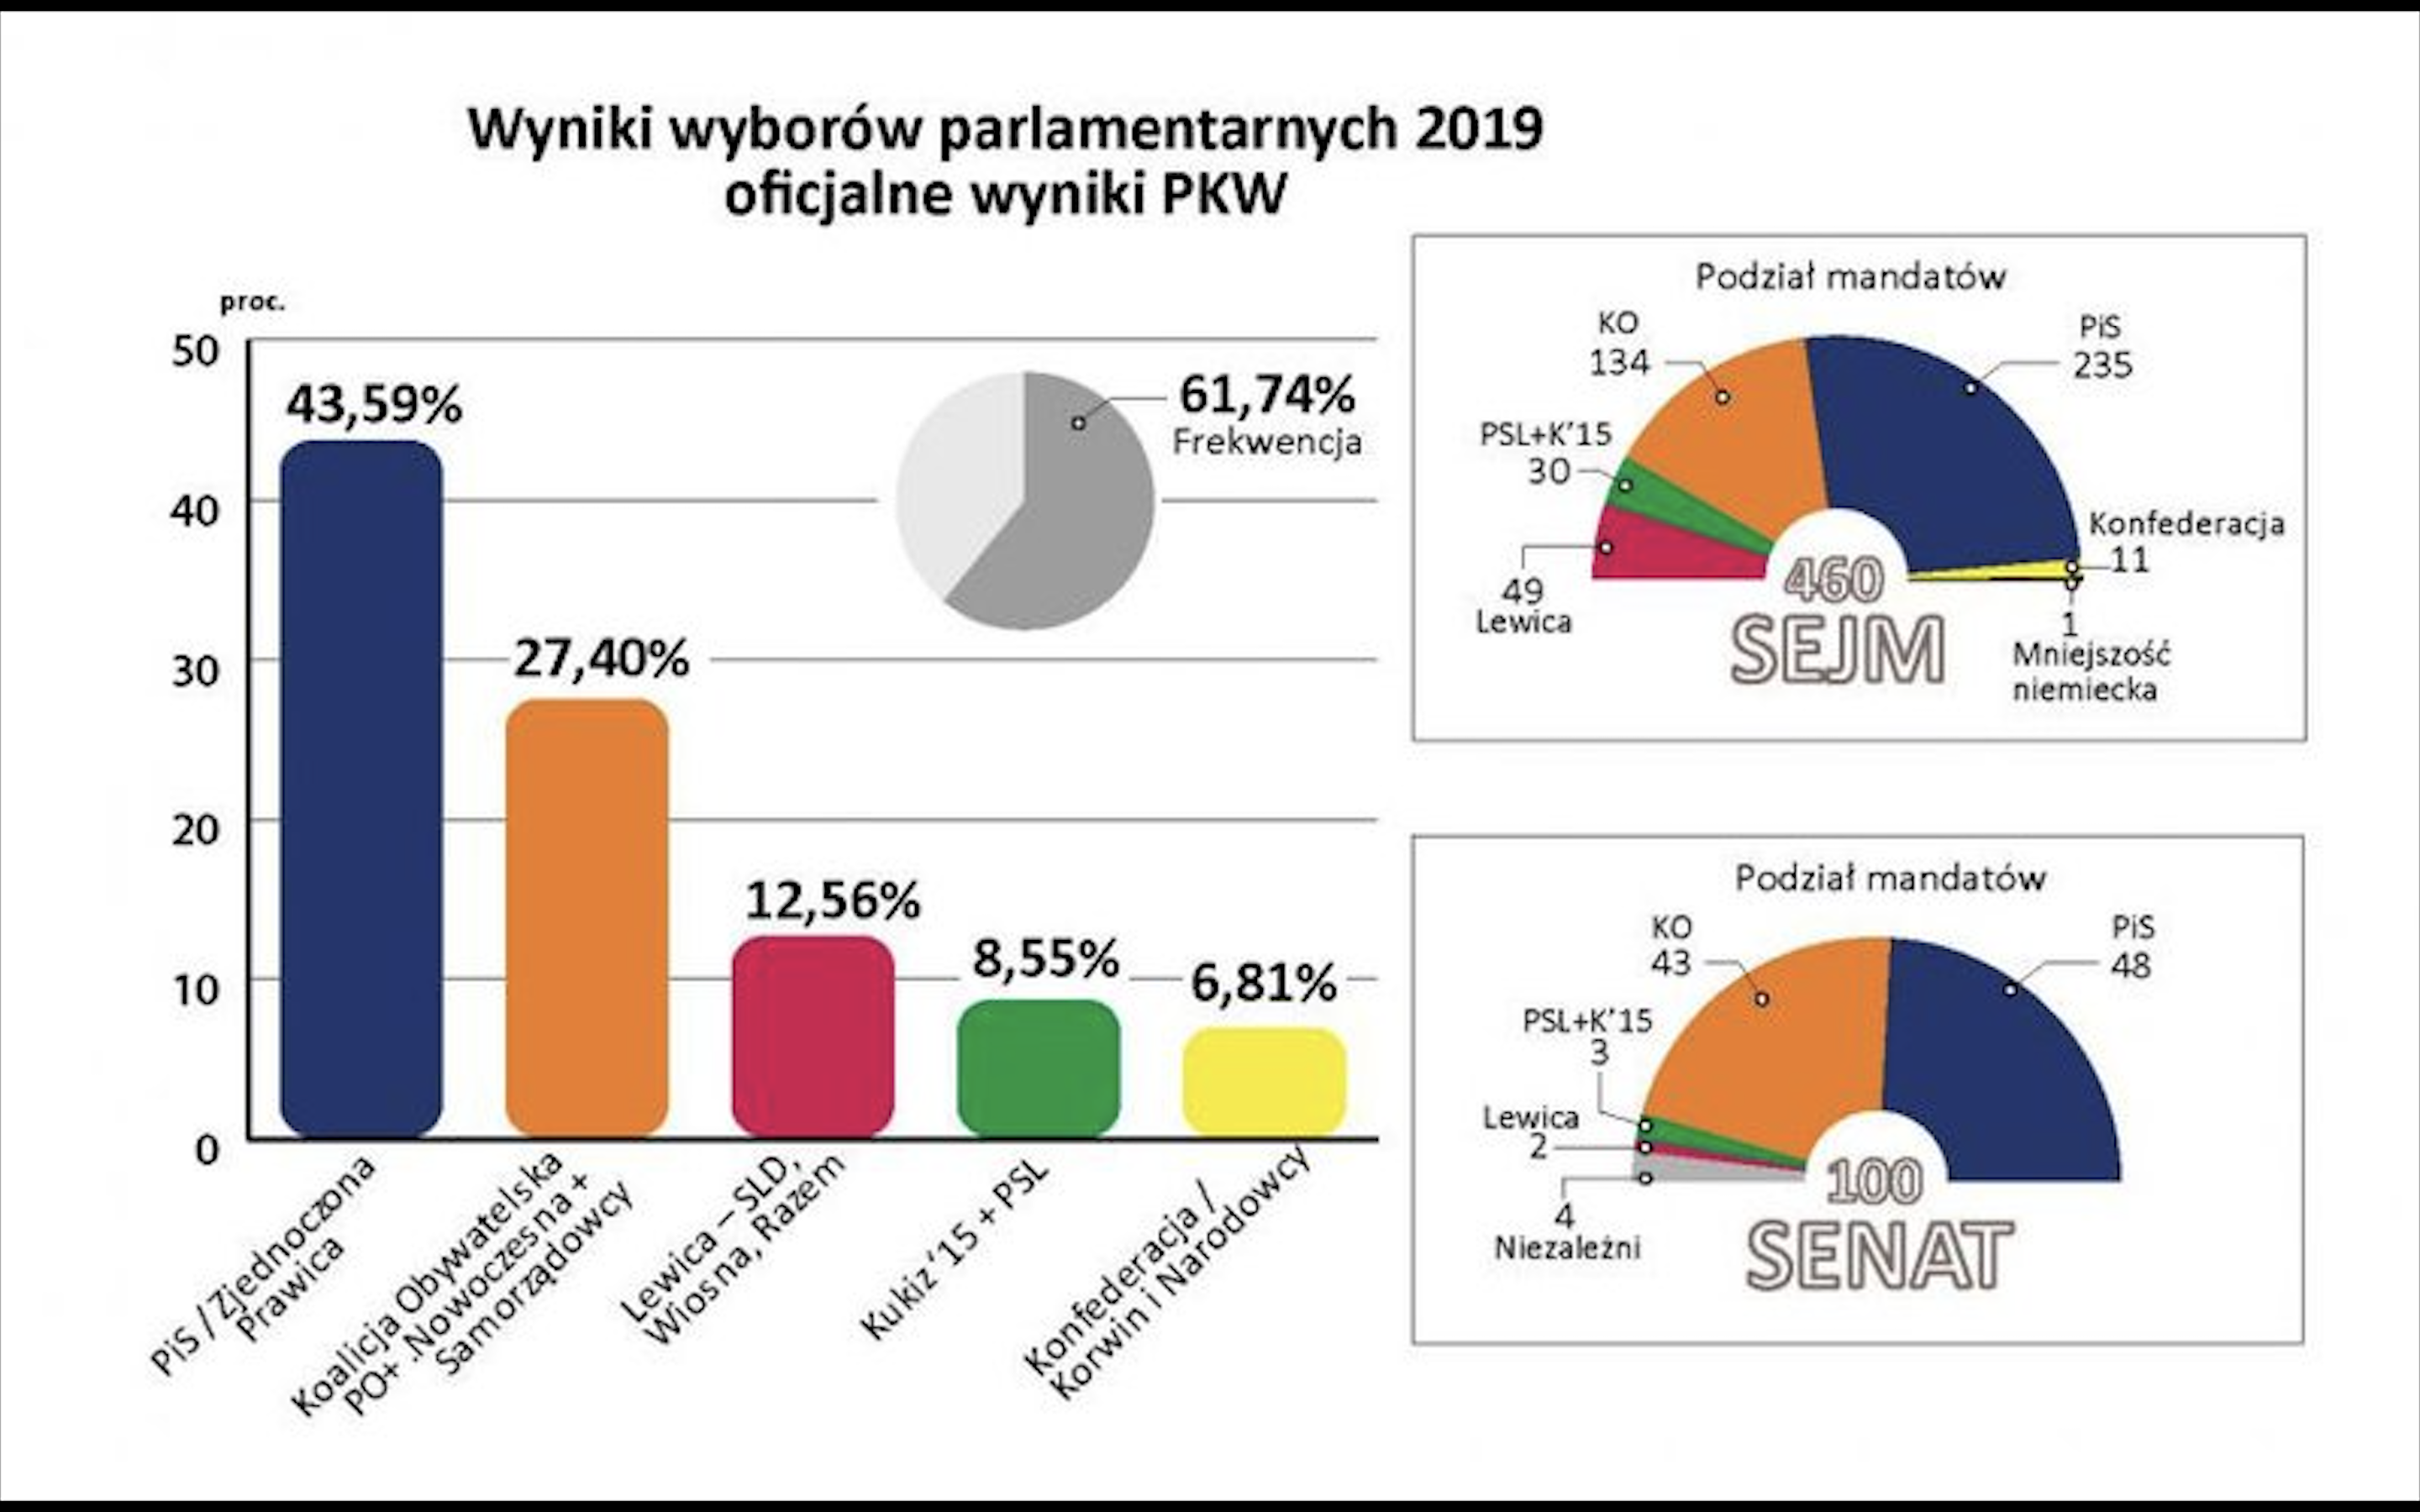 Whither Poland? After the 2019 parliamentary elections